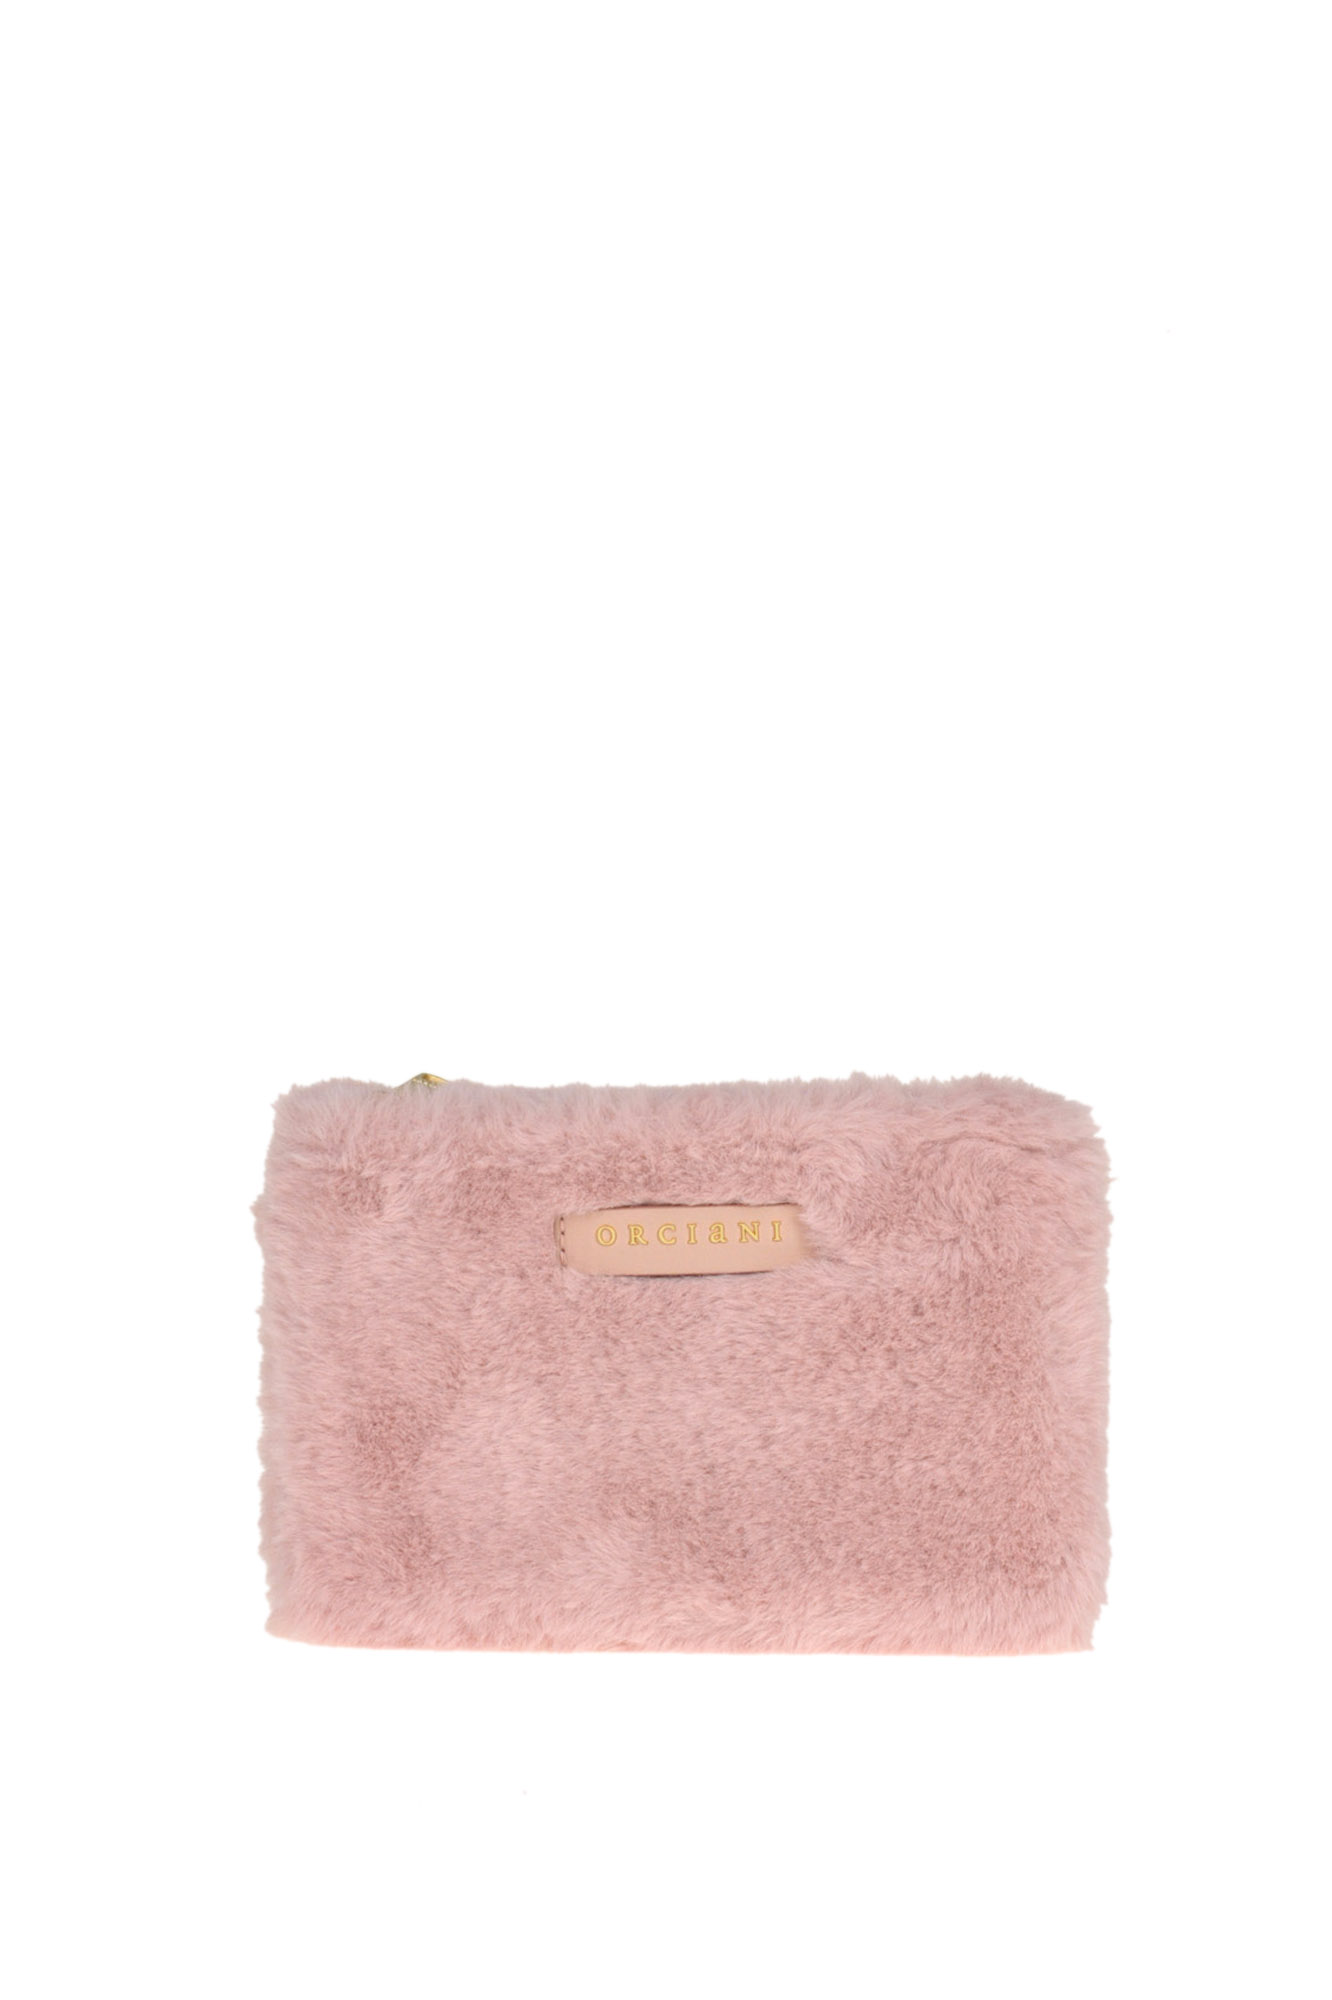 ORCIANI ECO-FUR POUCH